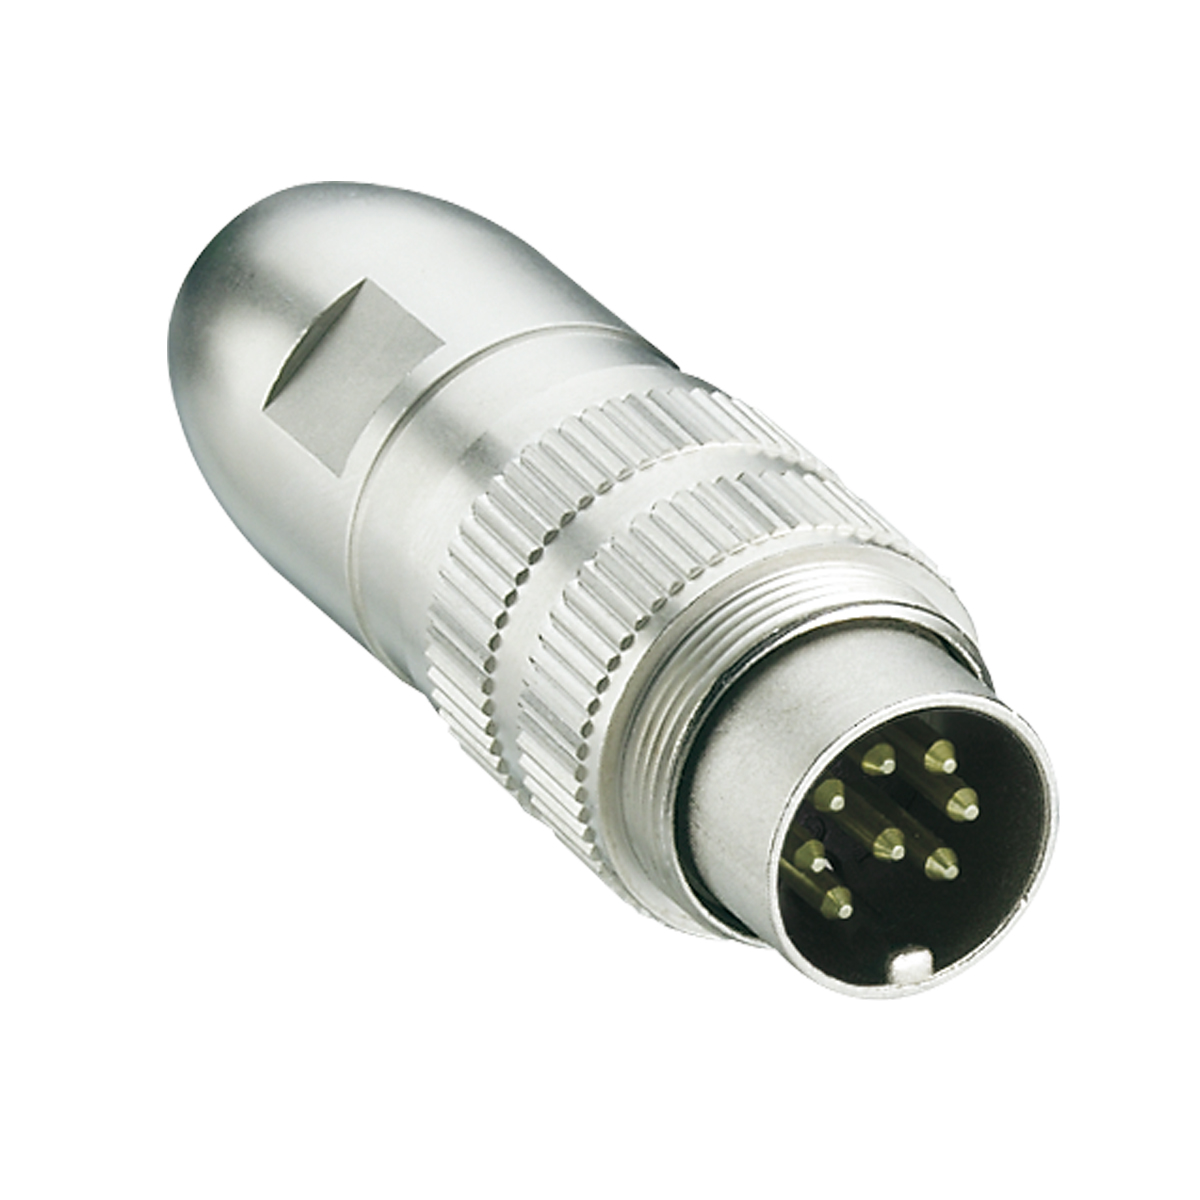 Lumberg: 0332-1 (Series 03 | Circular connectors with threaded joint M16 acc. to IEC 61076-2-106, IP40/IP68)